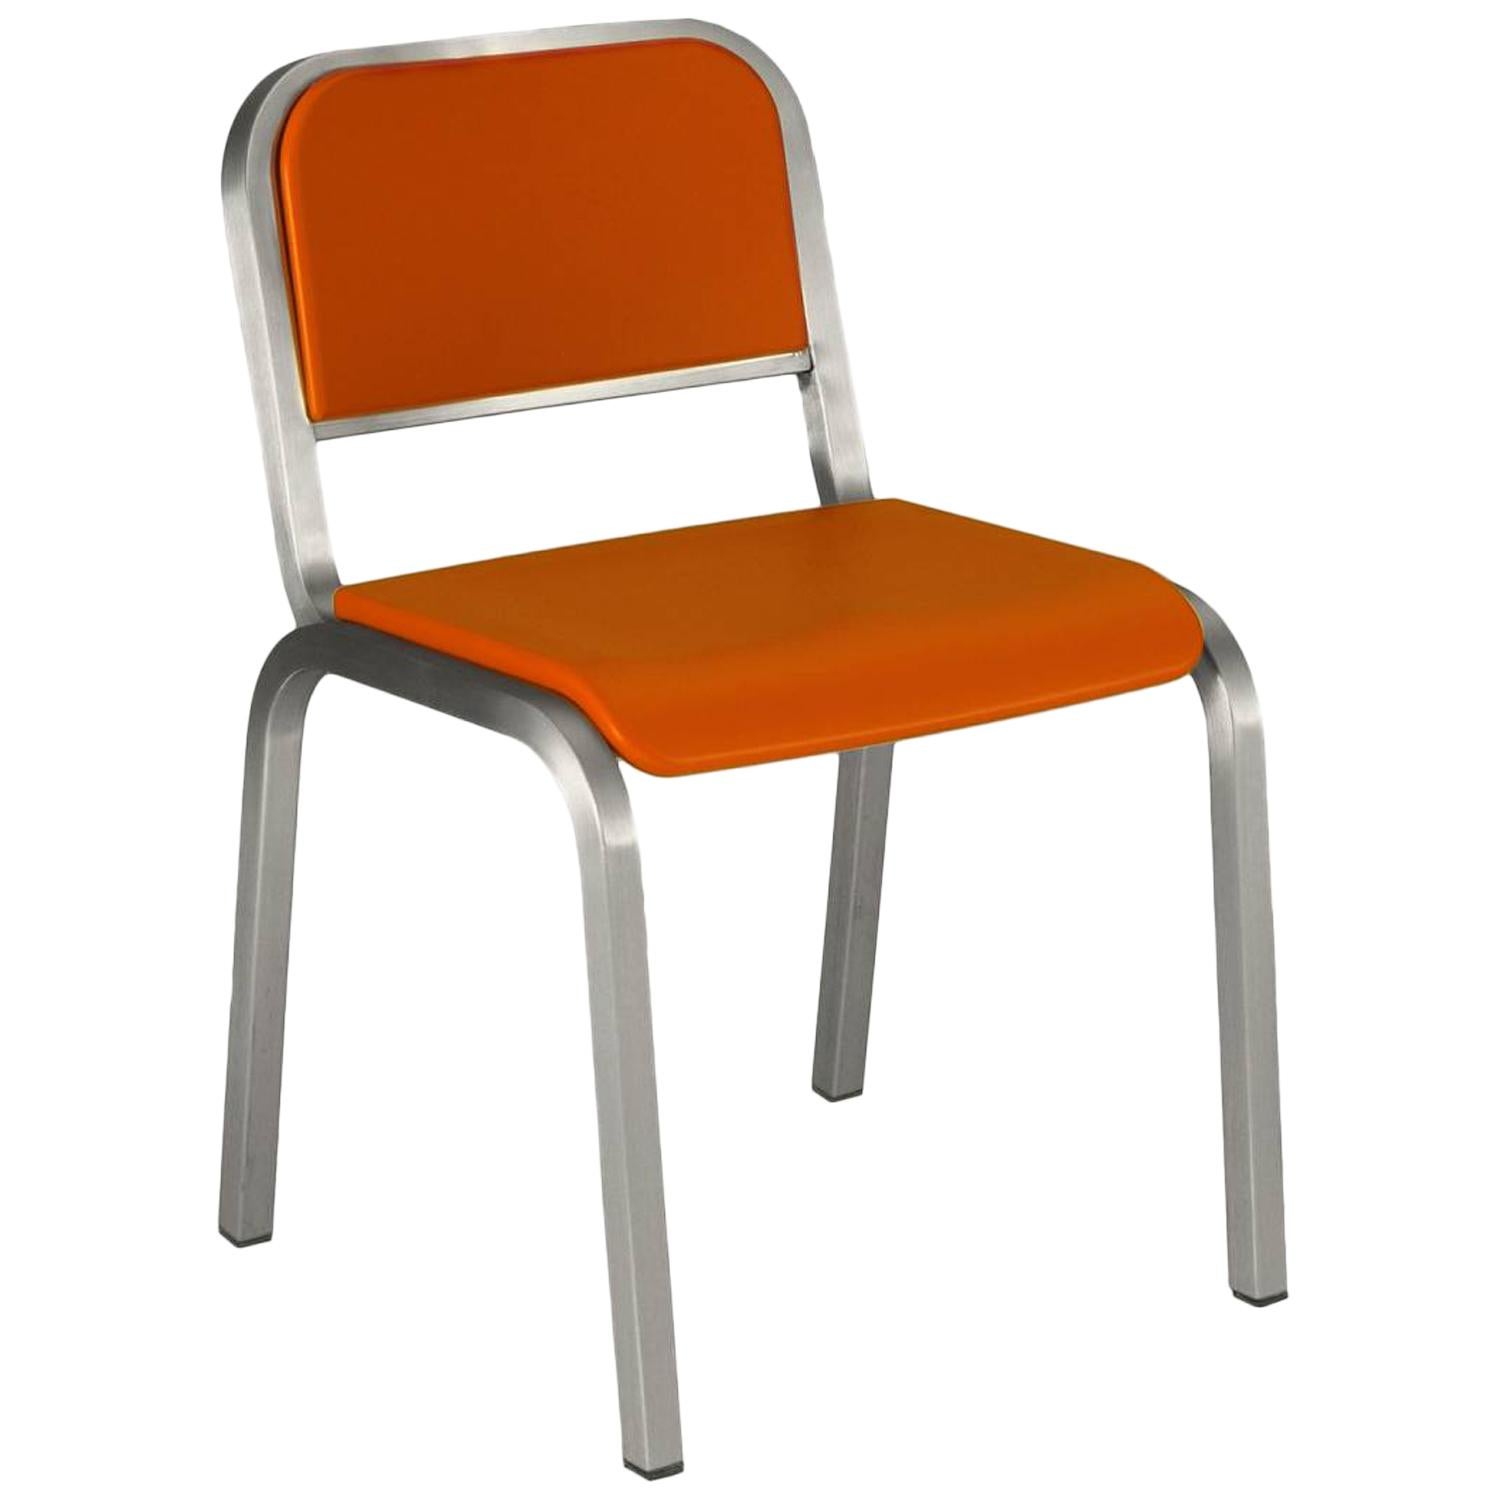 Emeco Nine-0 Chair in Brushed Aluminium and Orange by Ettore Sottsass